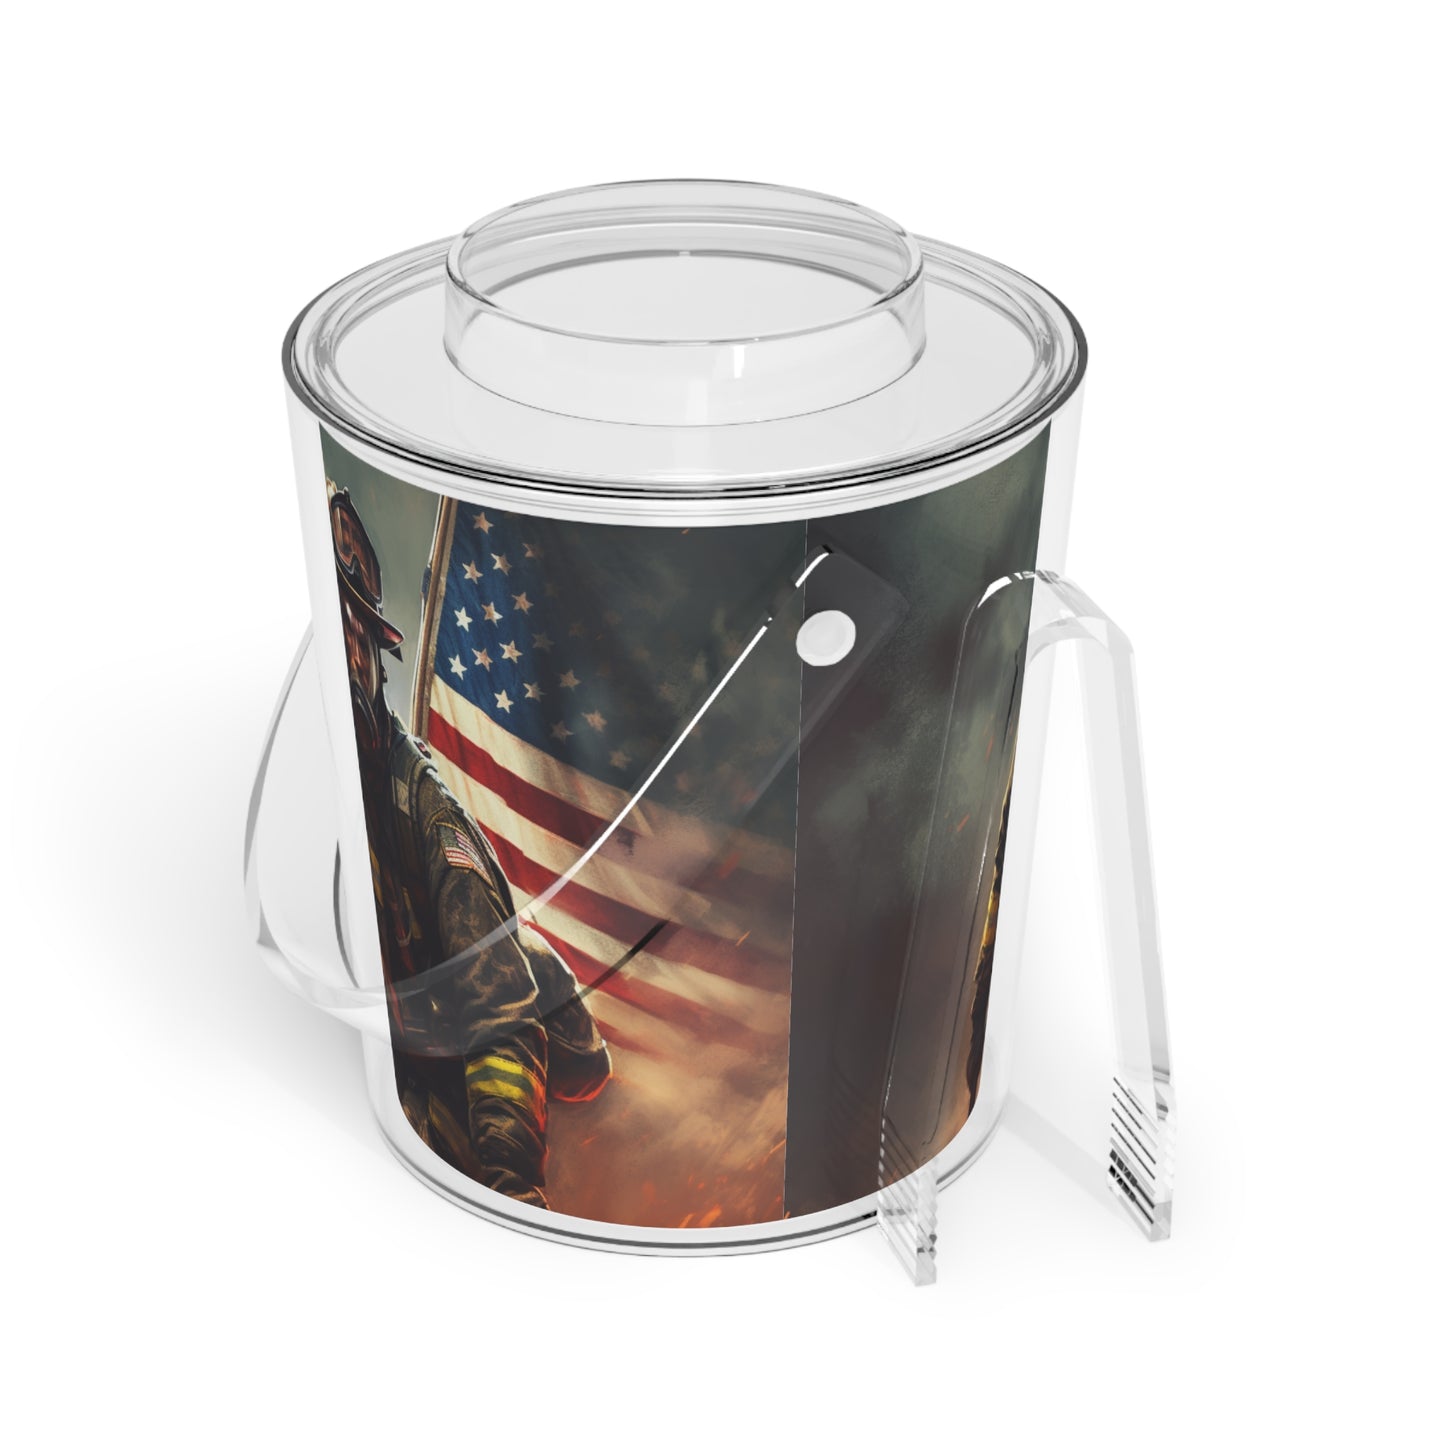 American Firefighter Themed Ice Bucket with Tongs, 3 qt Capacity, Acrylic Lucite, Wraparound Print